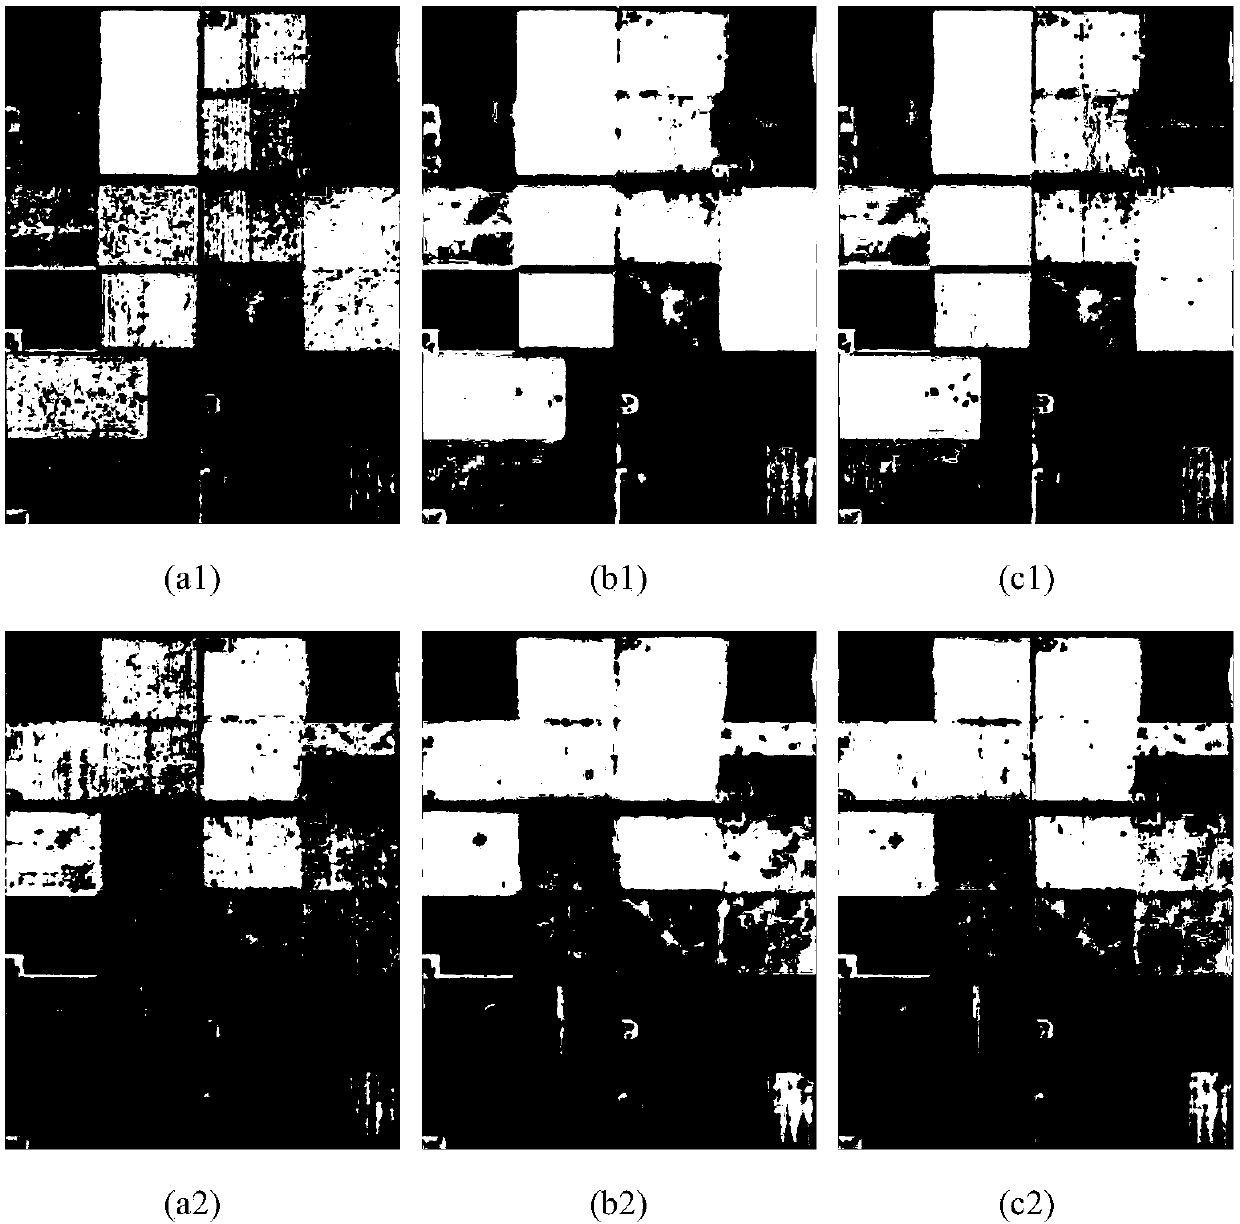 Similarity test-based dual-polarimetric SAR (synthetic aperture radar) image coherence speckle filtering method